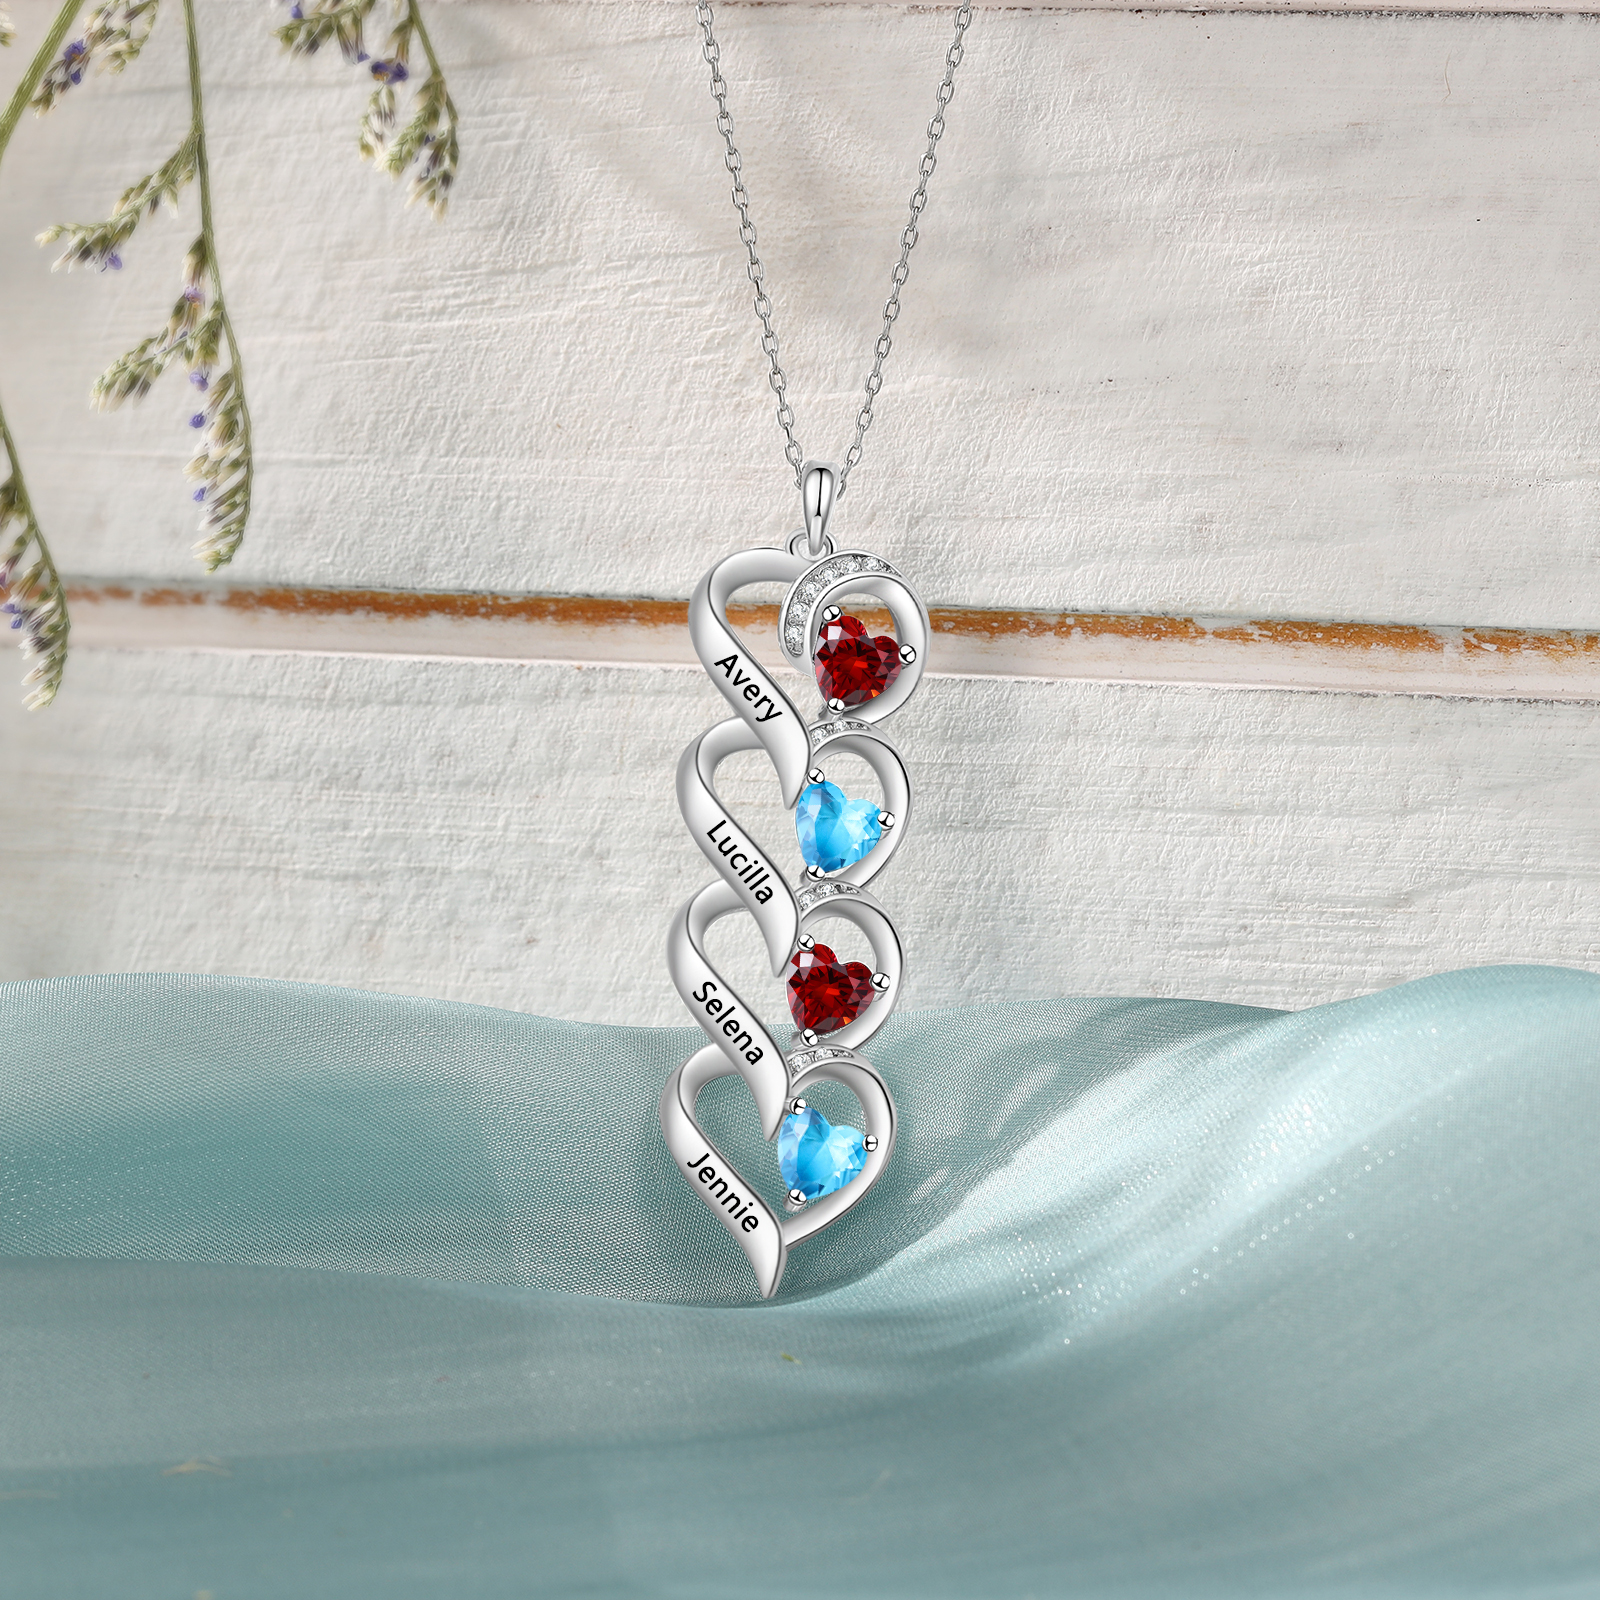 4 Name - Personalized Love Necklace with Customized Name and Birthstone, A Perfect and Exquisite Gift for Her